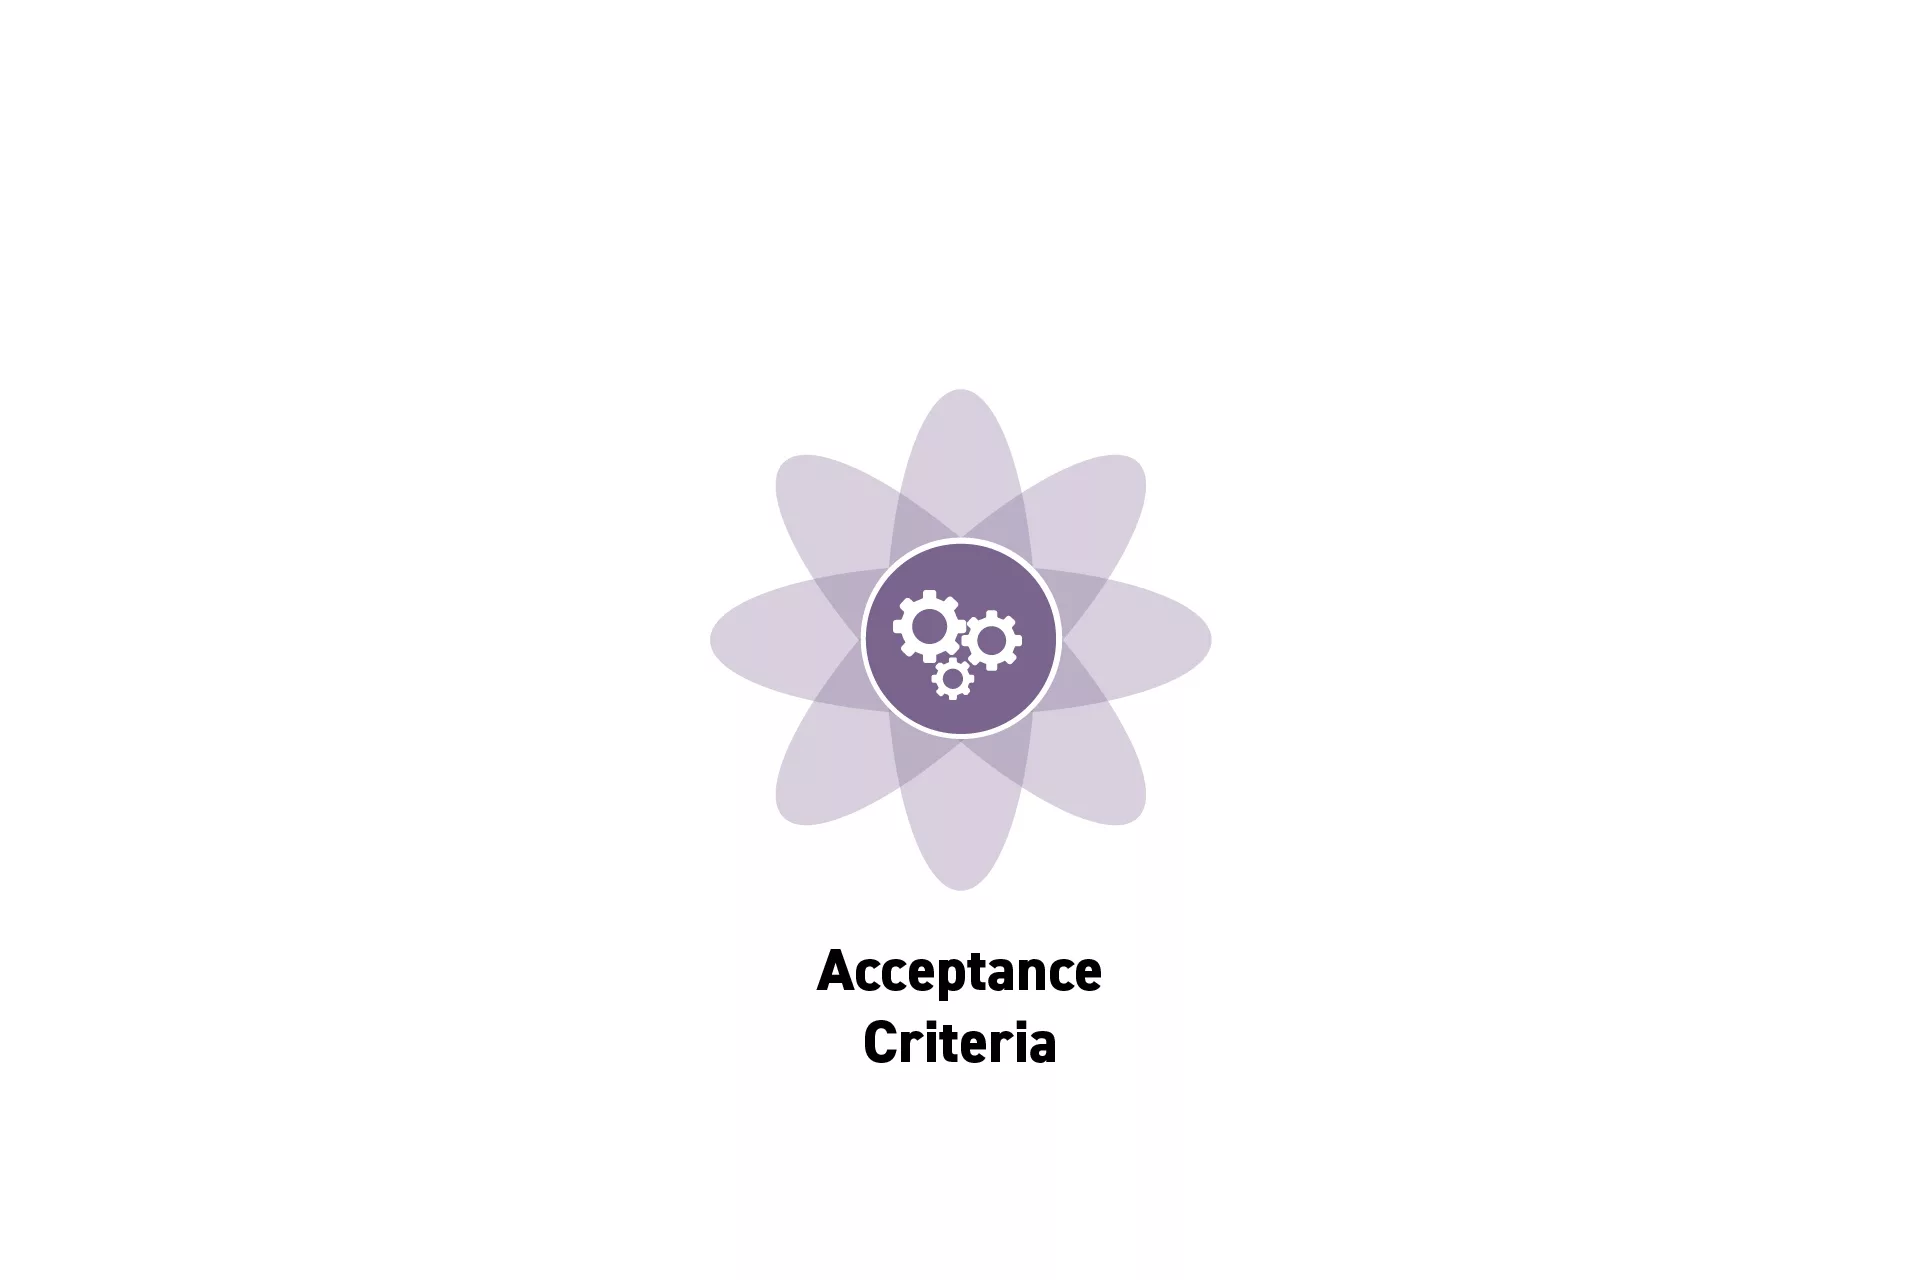 <p>A flower that represents Project Management with the text “Acceptance Criteria” beneath it.</p>